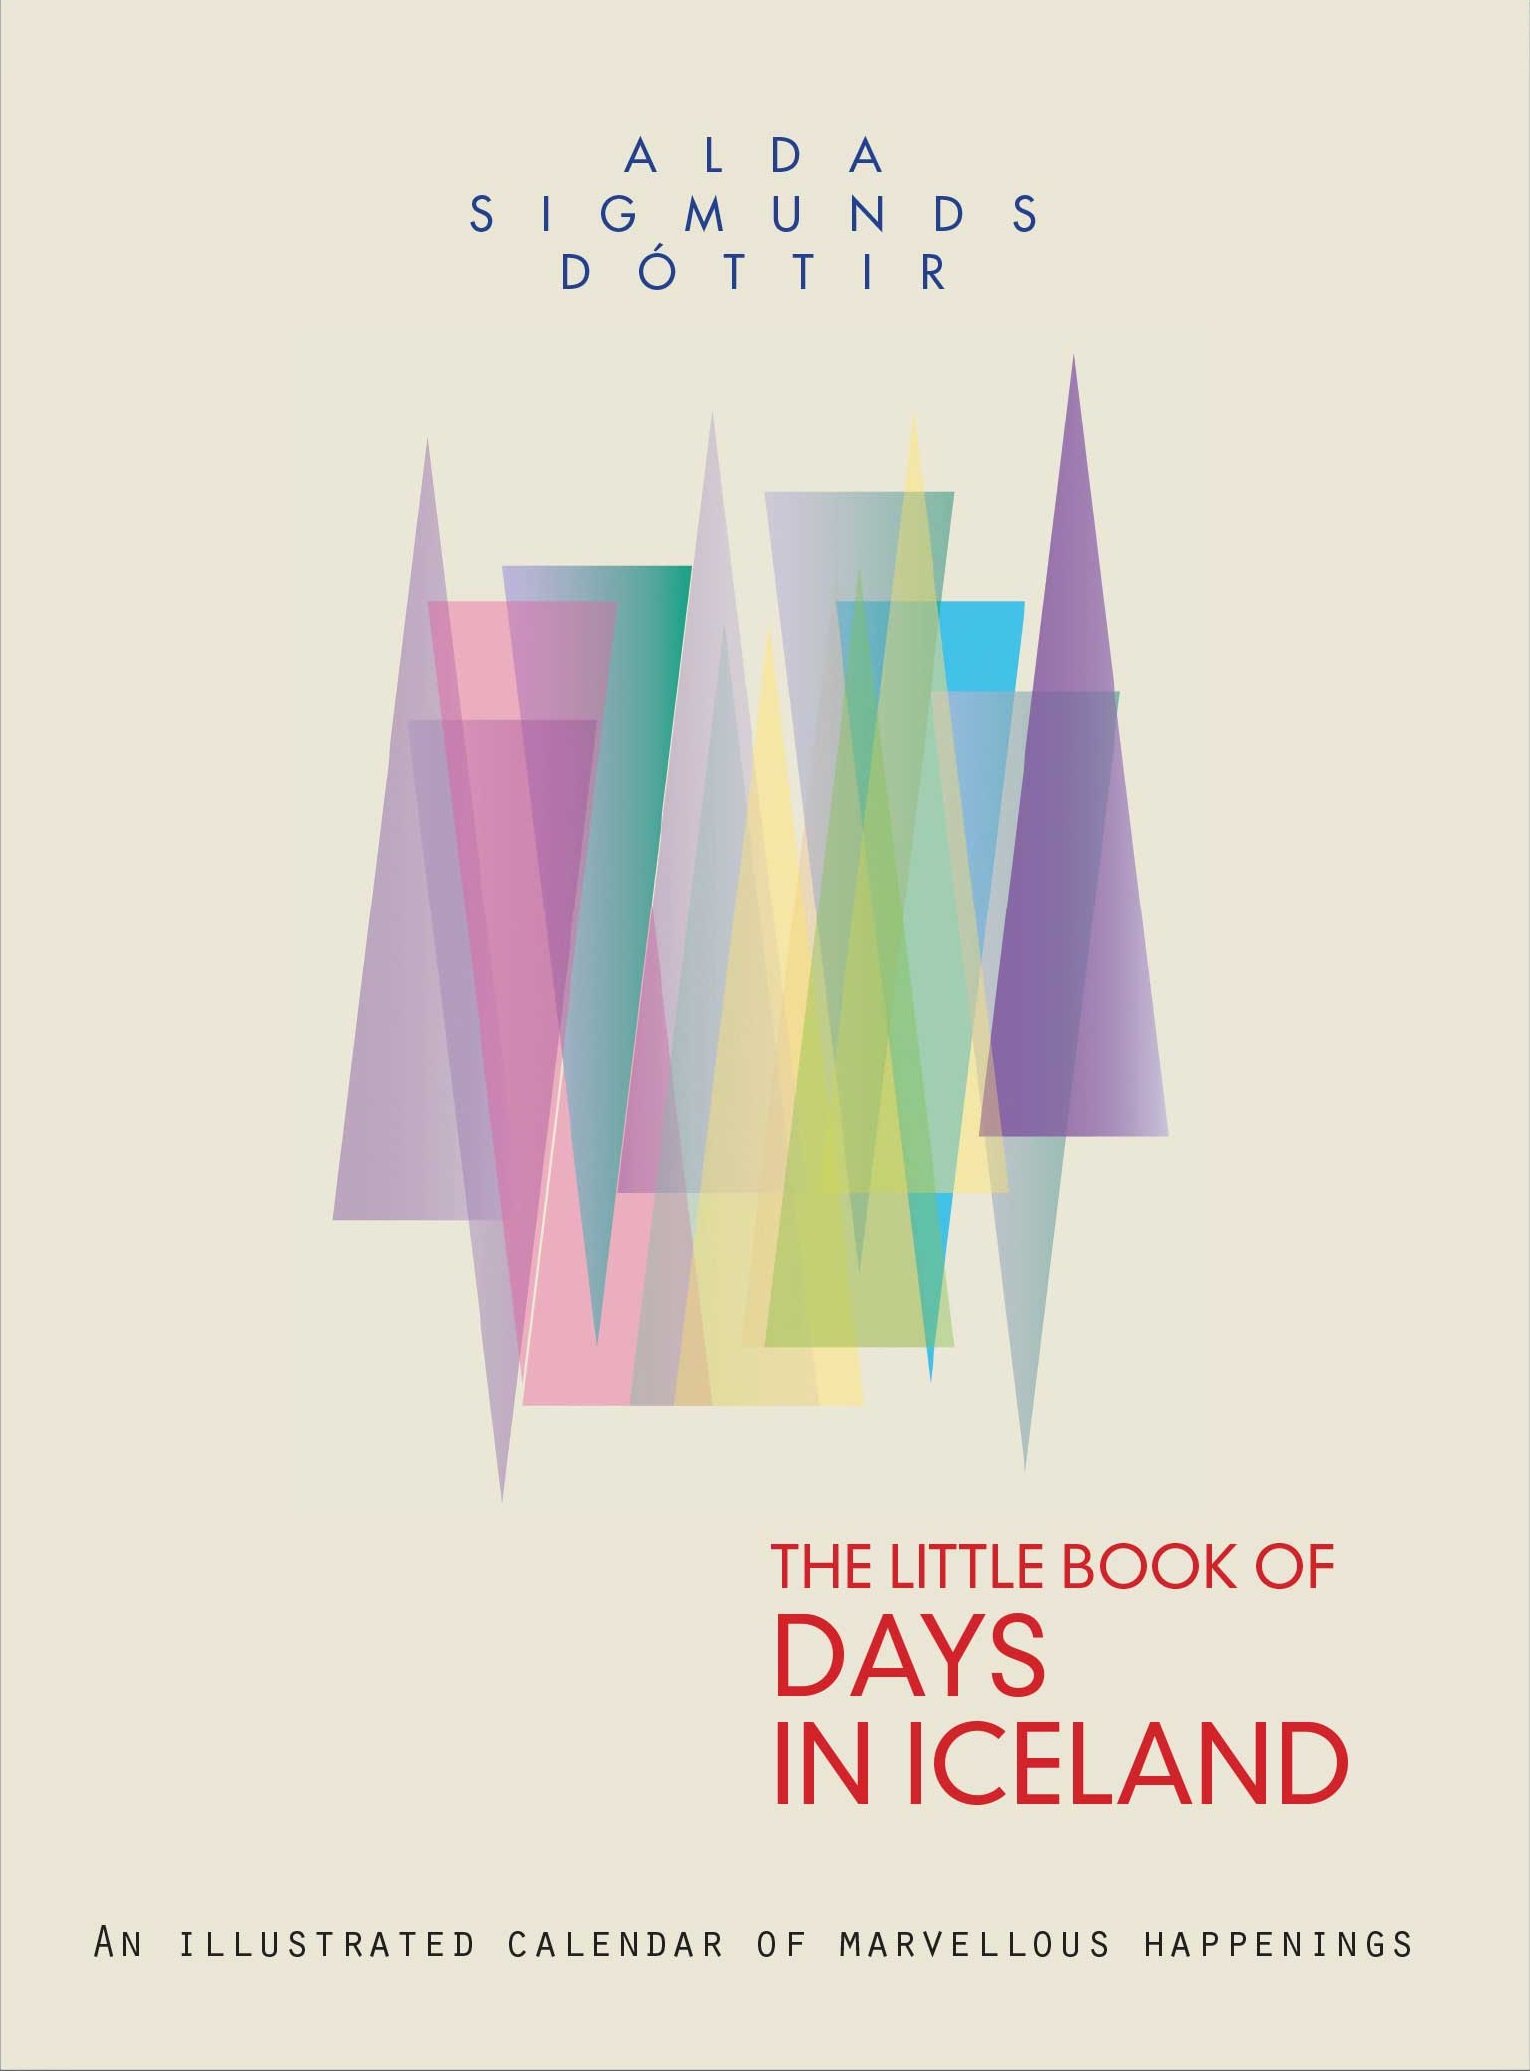 The Little Book of Days in Iceland